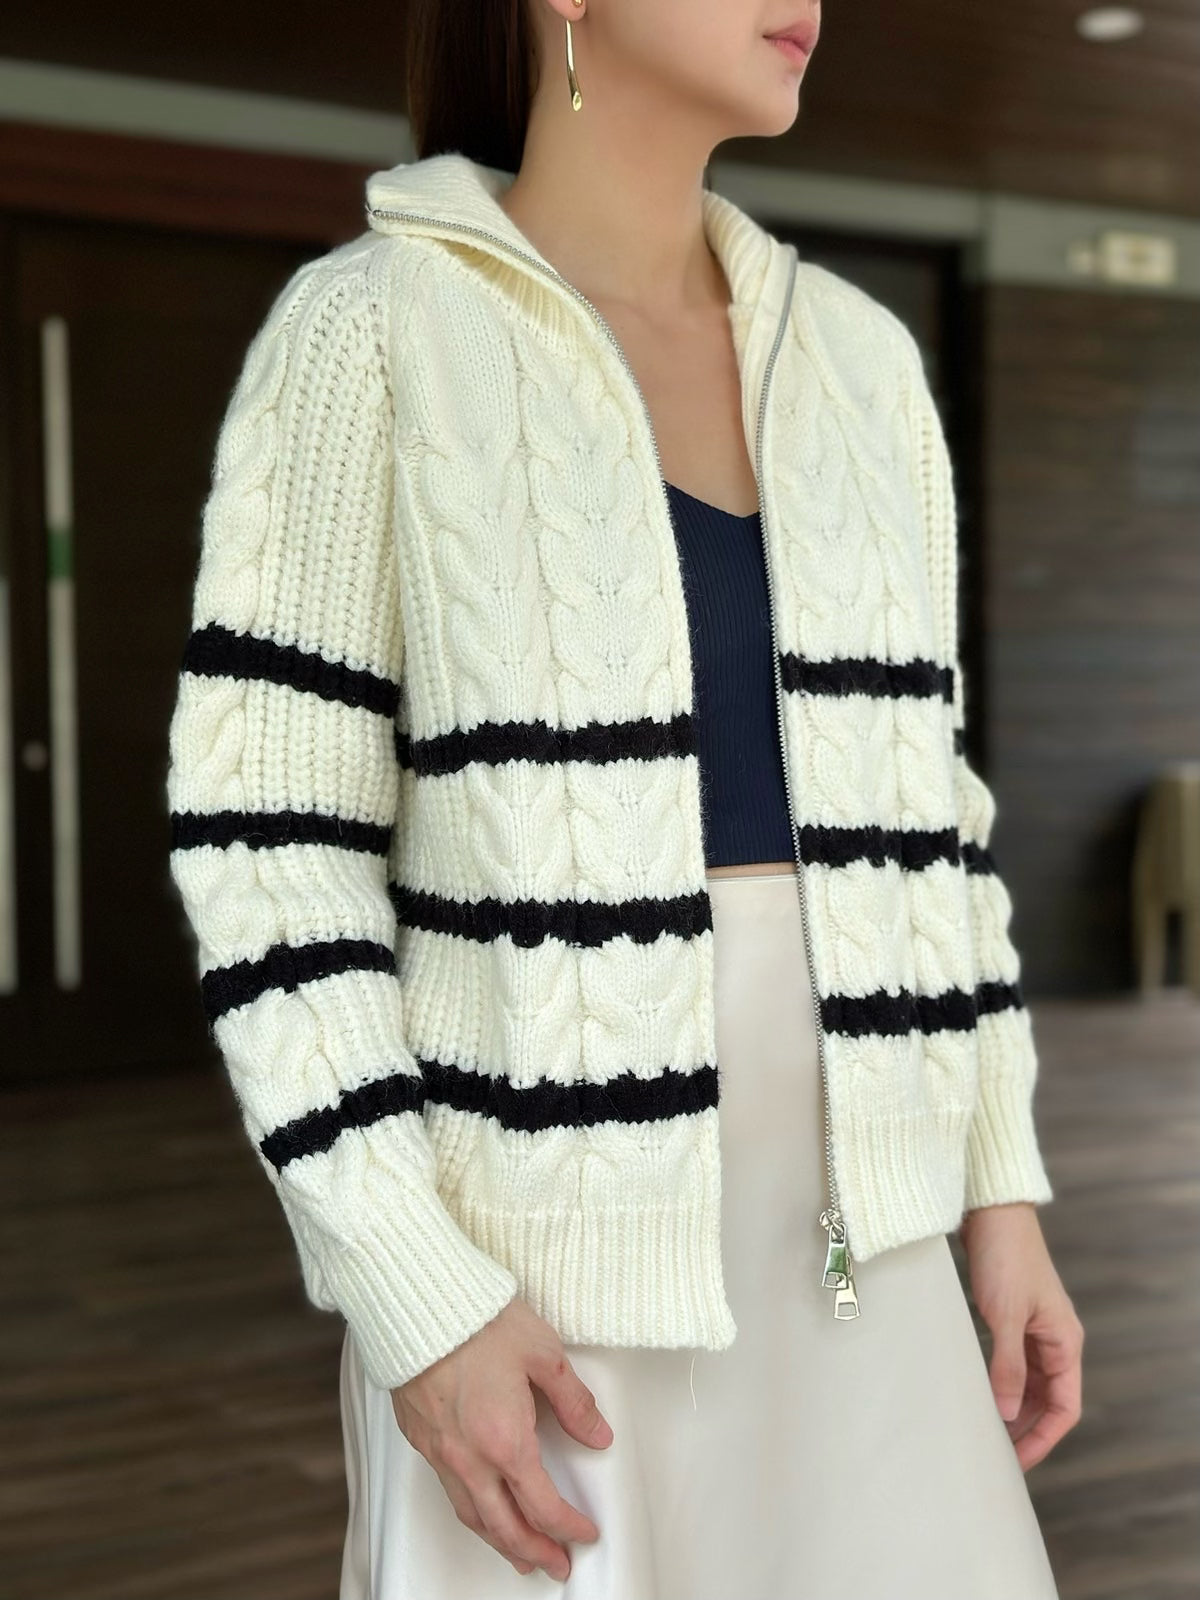 Bette Stripes Cable Knit Zip Up White